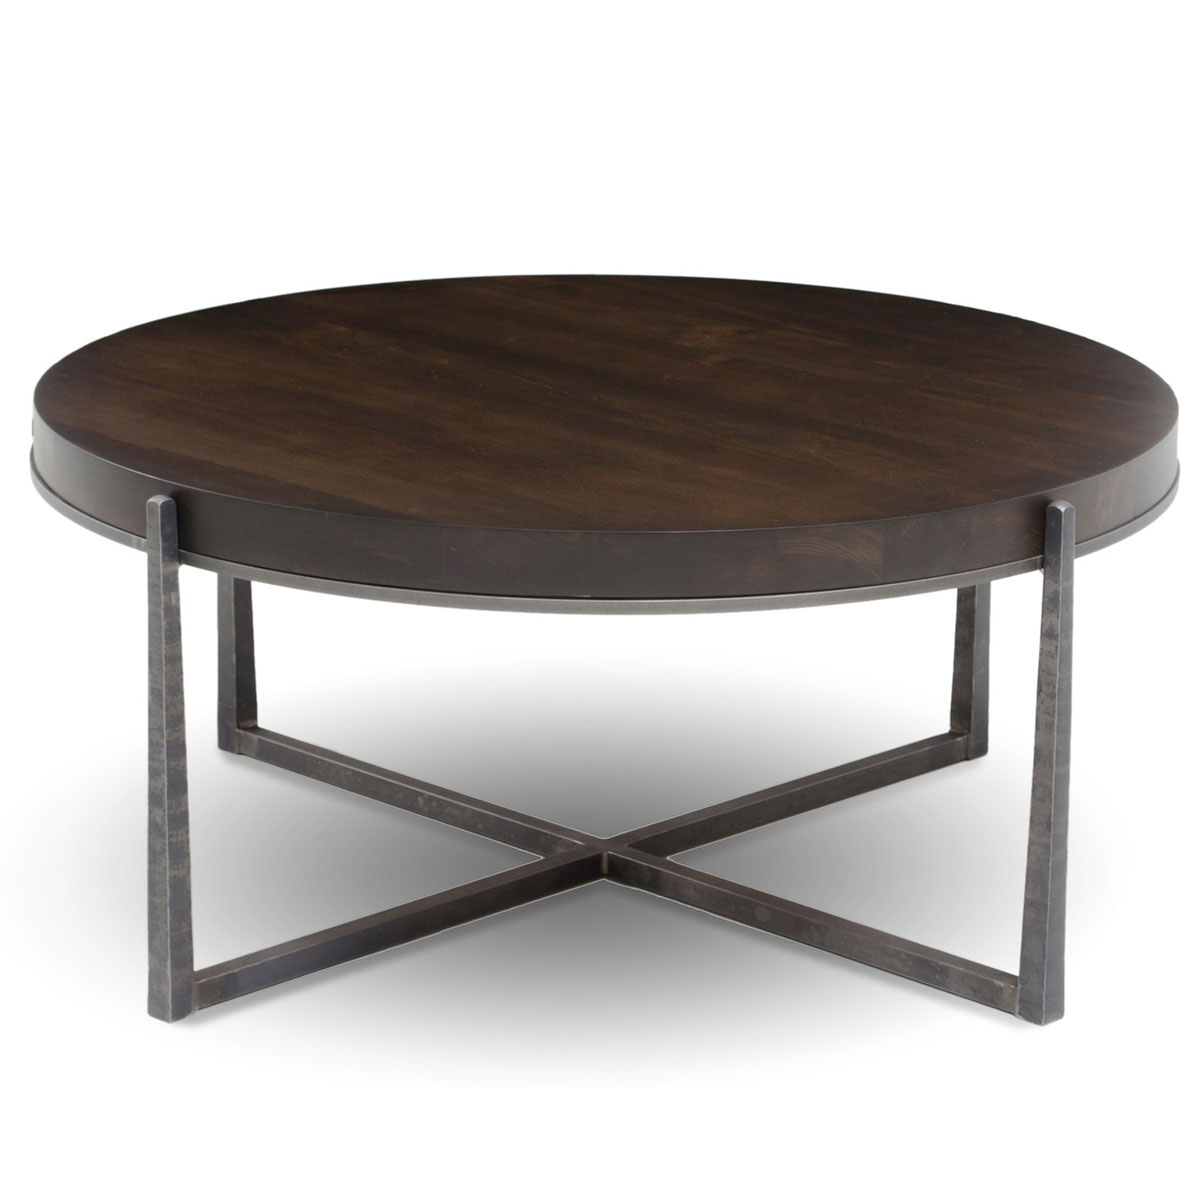 Charleston Forge Cooper 42 inch Round Cocktail Table 